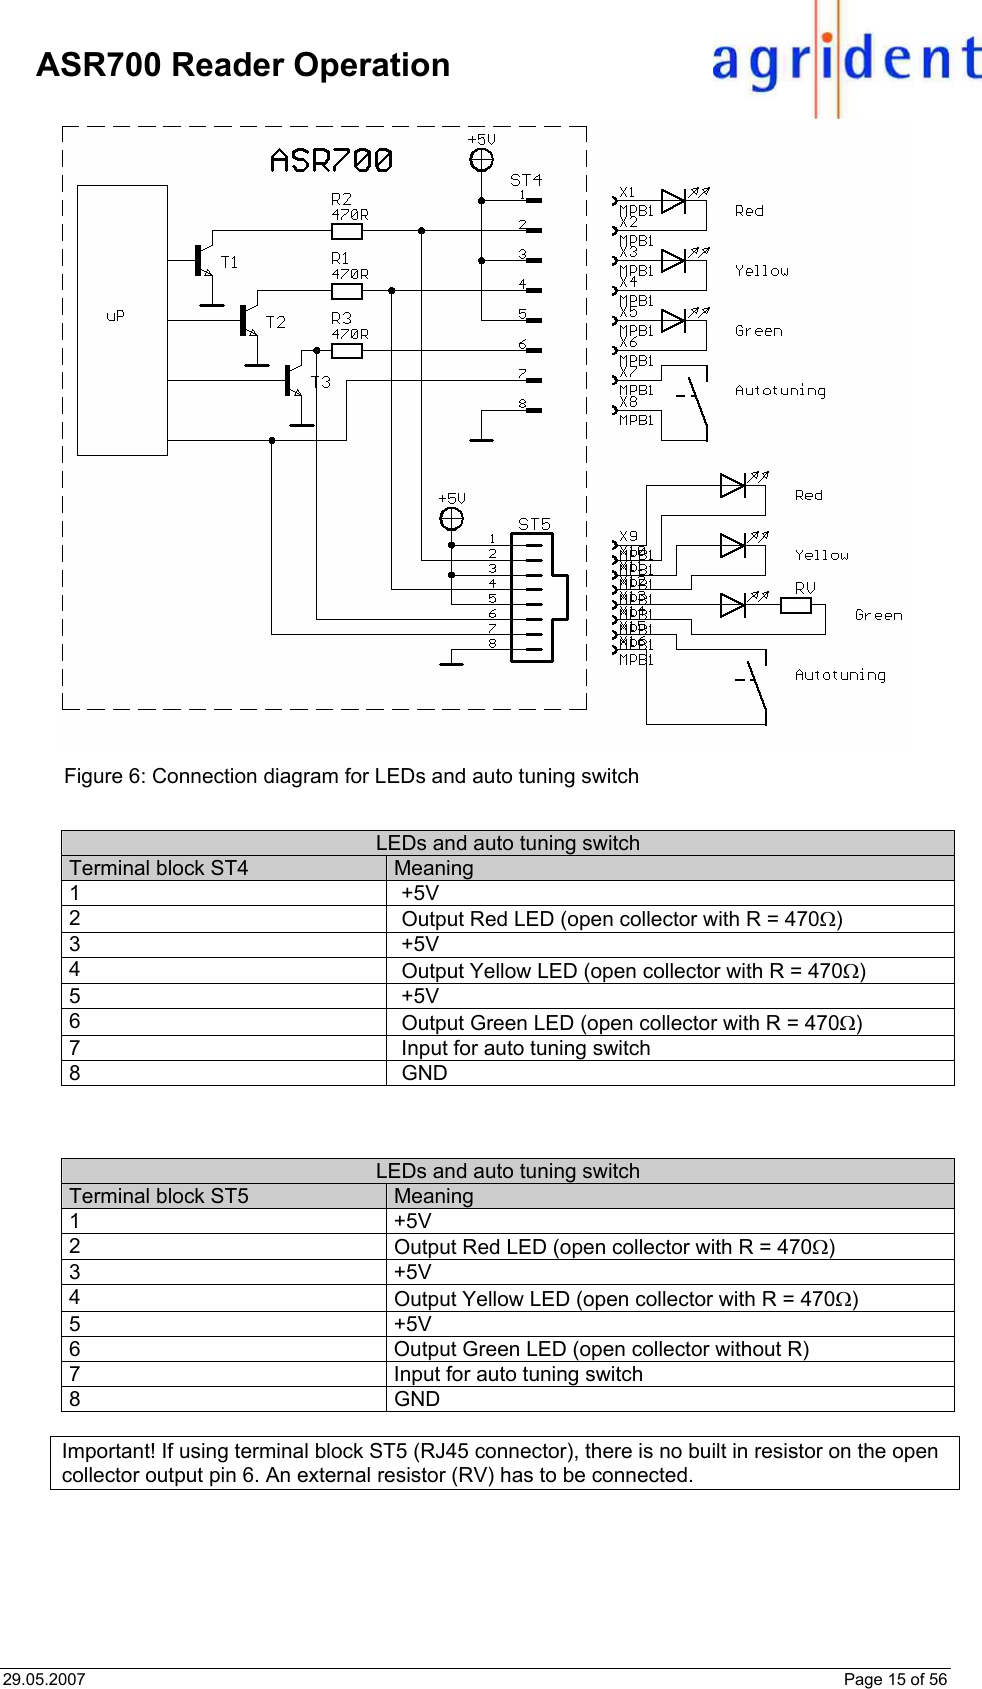 29.05.2007    Page 15 of 56     ASR700 Reader Operation  Figure 6: Connection diagram for LEDs and auto tuning switch  LEDs and auto tuning switch Terminal block ST4  Meaning 1 +5V 2  Output Red LED (open collector with R = 470Ω) 3 +5V 4  Output Yellow LED (open collector with R = 470Ω) 5 +5V 6  Output Green LED (open collector with R = 470Ω) 7  Input for auto tuning switch 8 GND    LEDs and auto tuning switch Terminal block ST5  Meaning 1 +5V 2  Output Red LED (open collector with R = 470Ω) 3 +5V 4  Output Yellow LED (open collector with R = 470Ω) 5 +5V 6  Output Green LED (open collector without R) 7  Input for auto tuning switch 8 GND  Important! If using terminal block ST5 (RJ45 connector), there is no built in resistor on the open collector output pin 6. An external resistor (RV) has to be connected.  